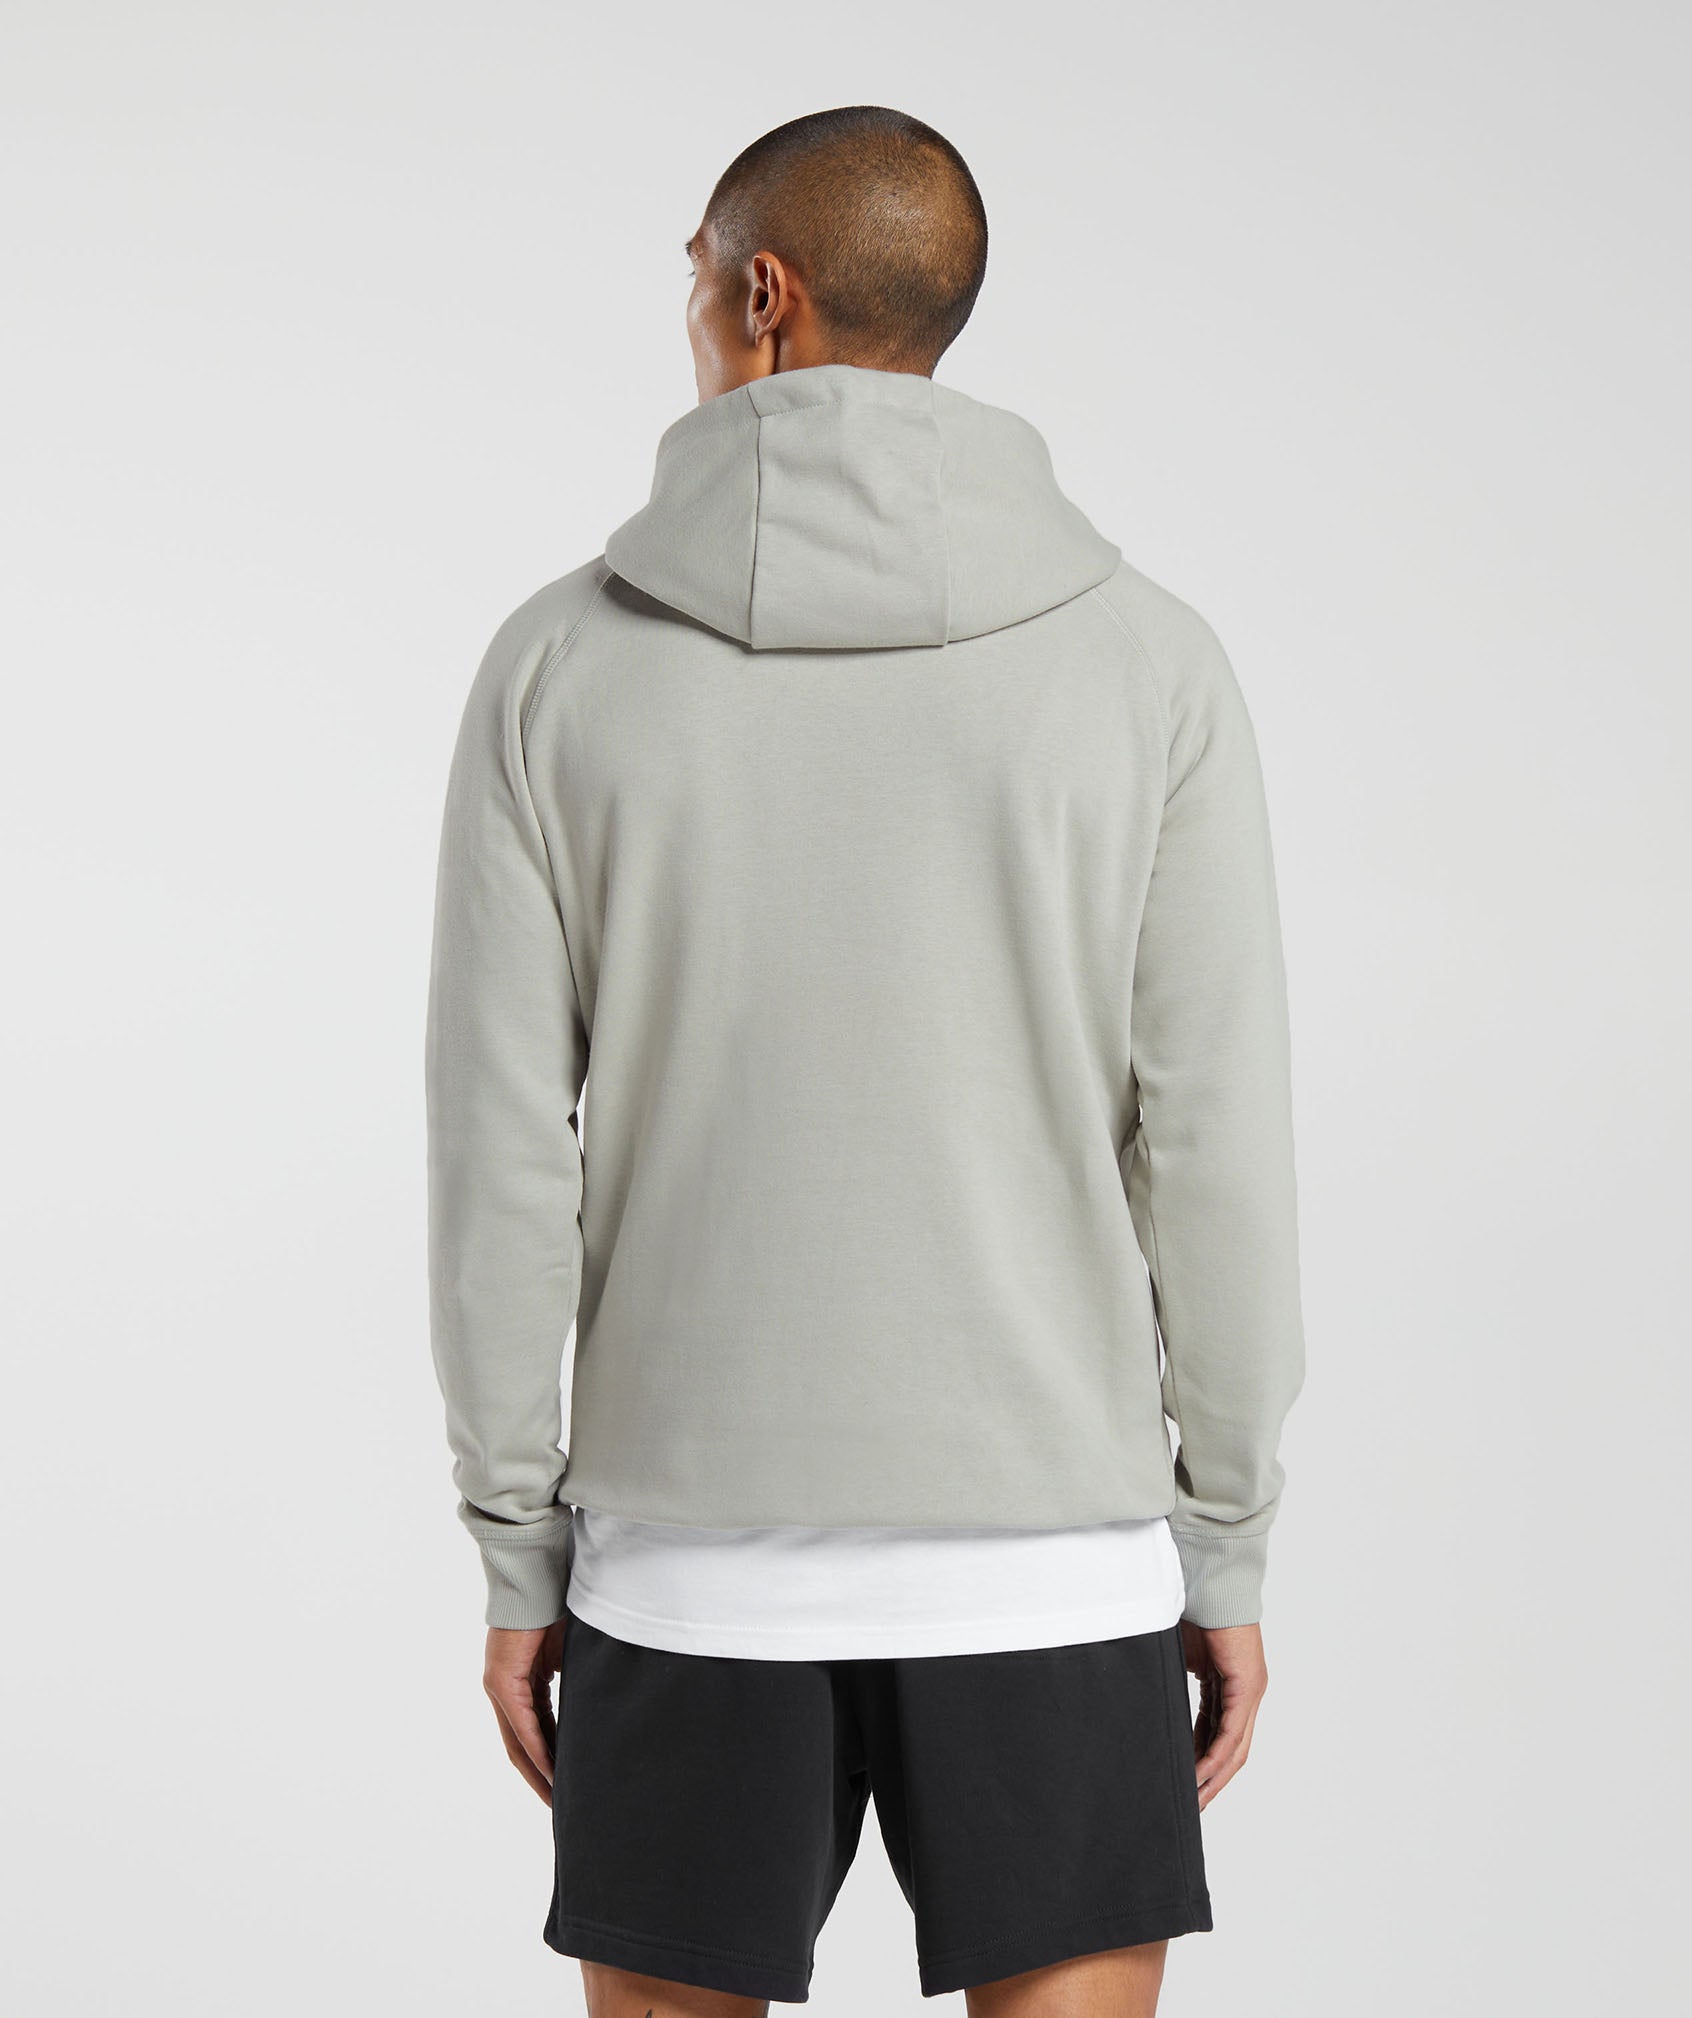 Crest Hoodie in Stone Grey - view 2